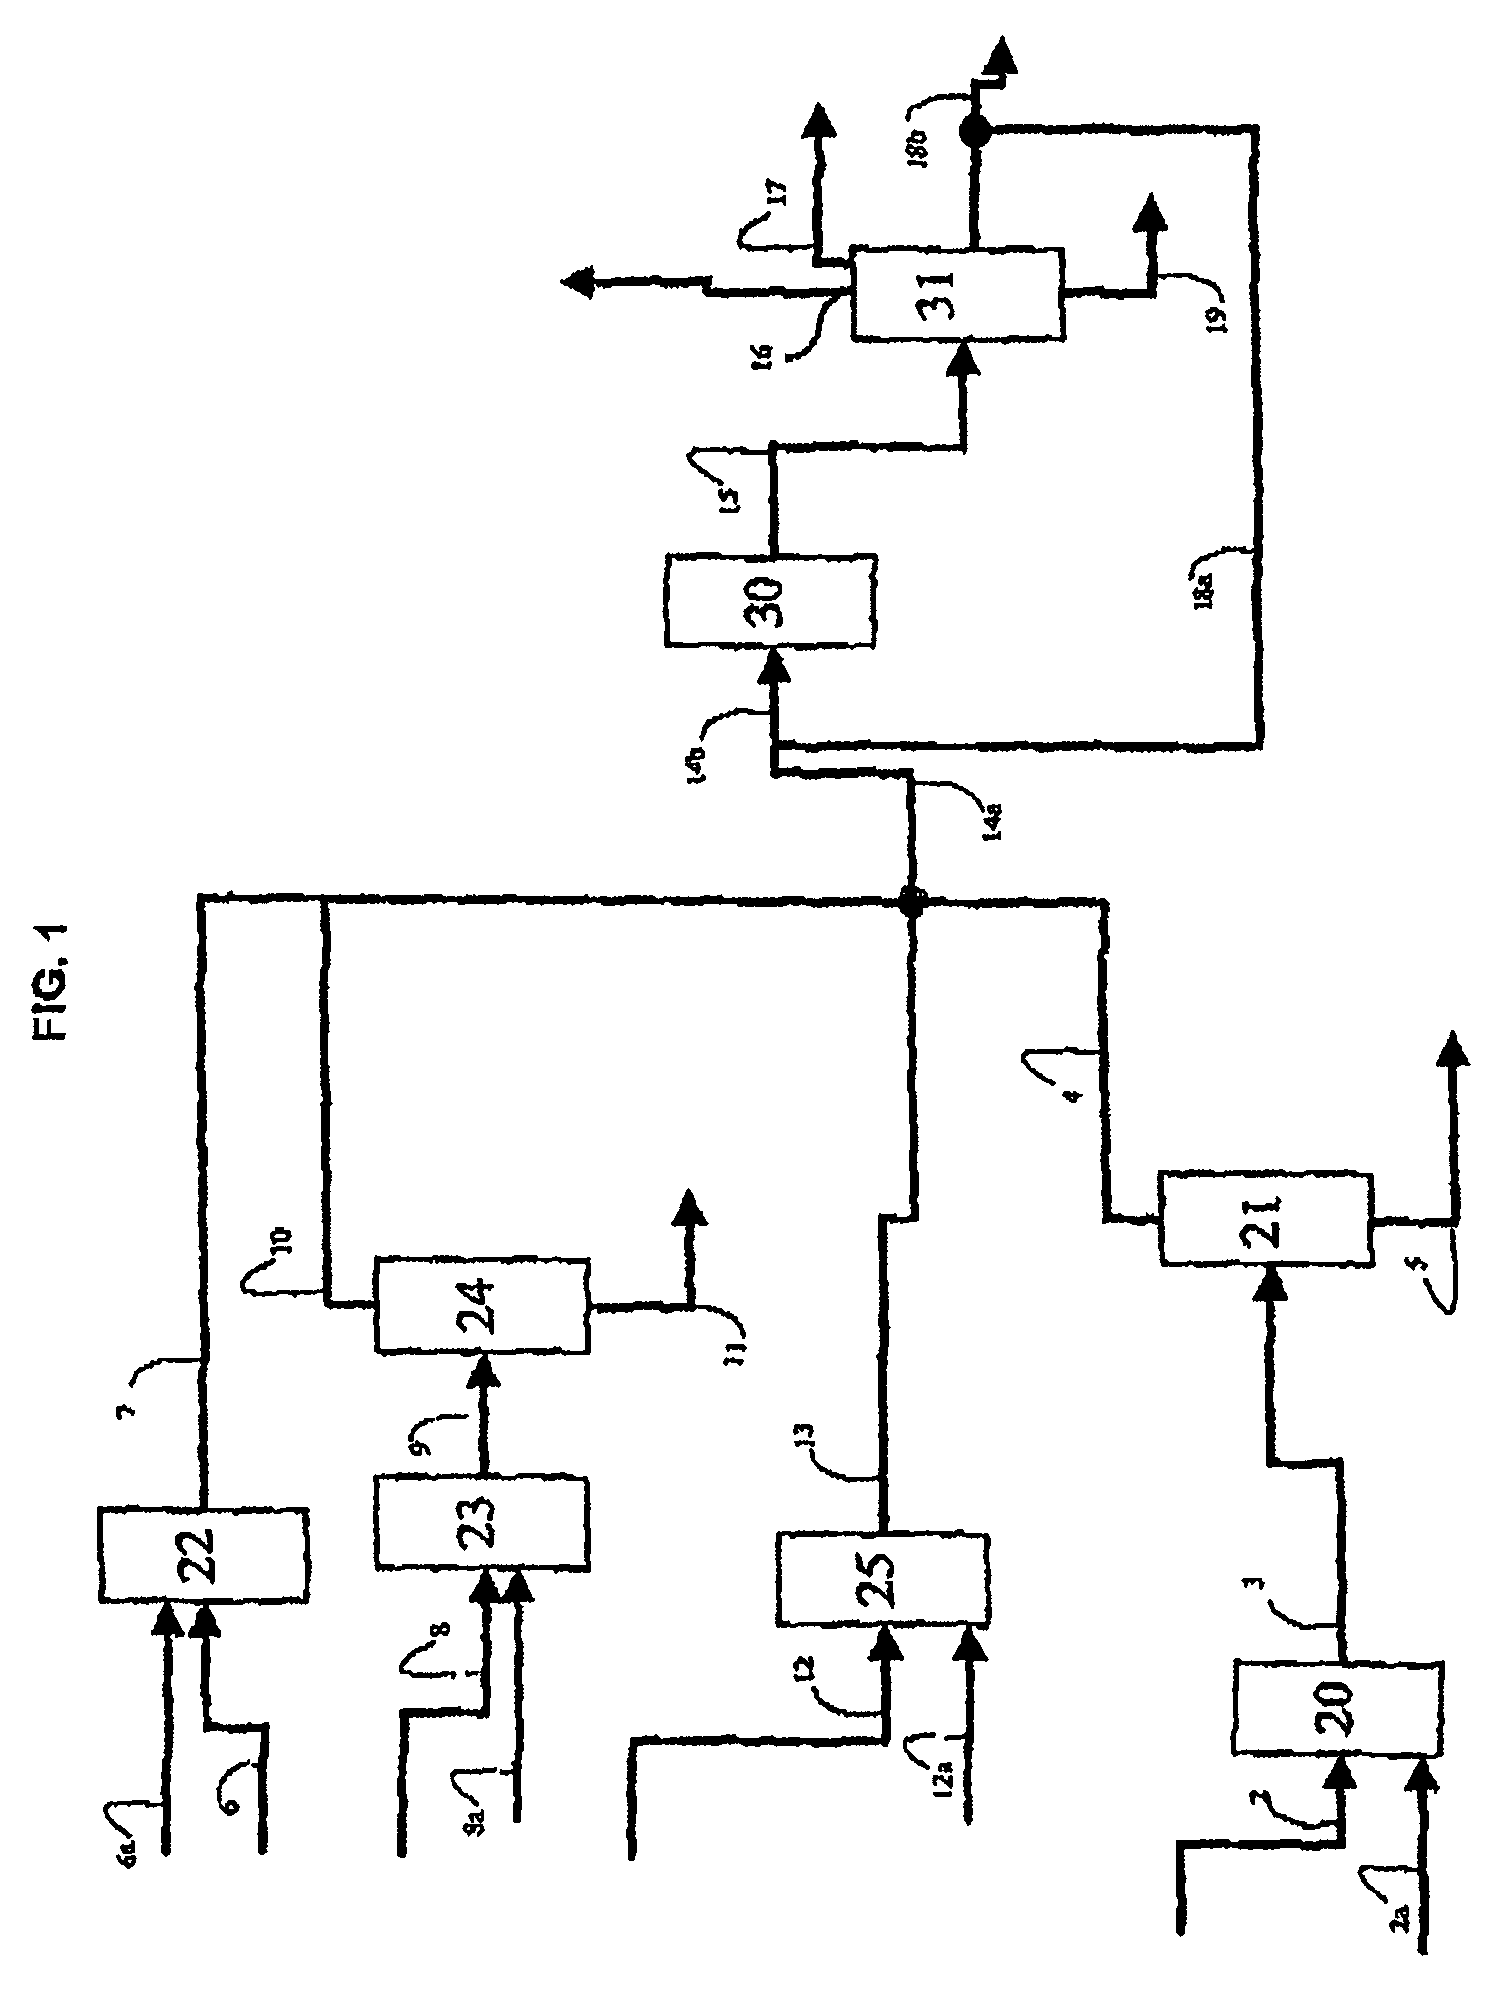 Process for producing propylene in the presence of a macroporous catalyst in the form of spherical beads